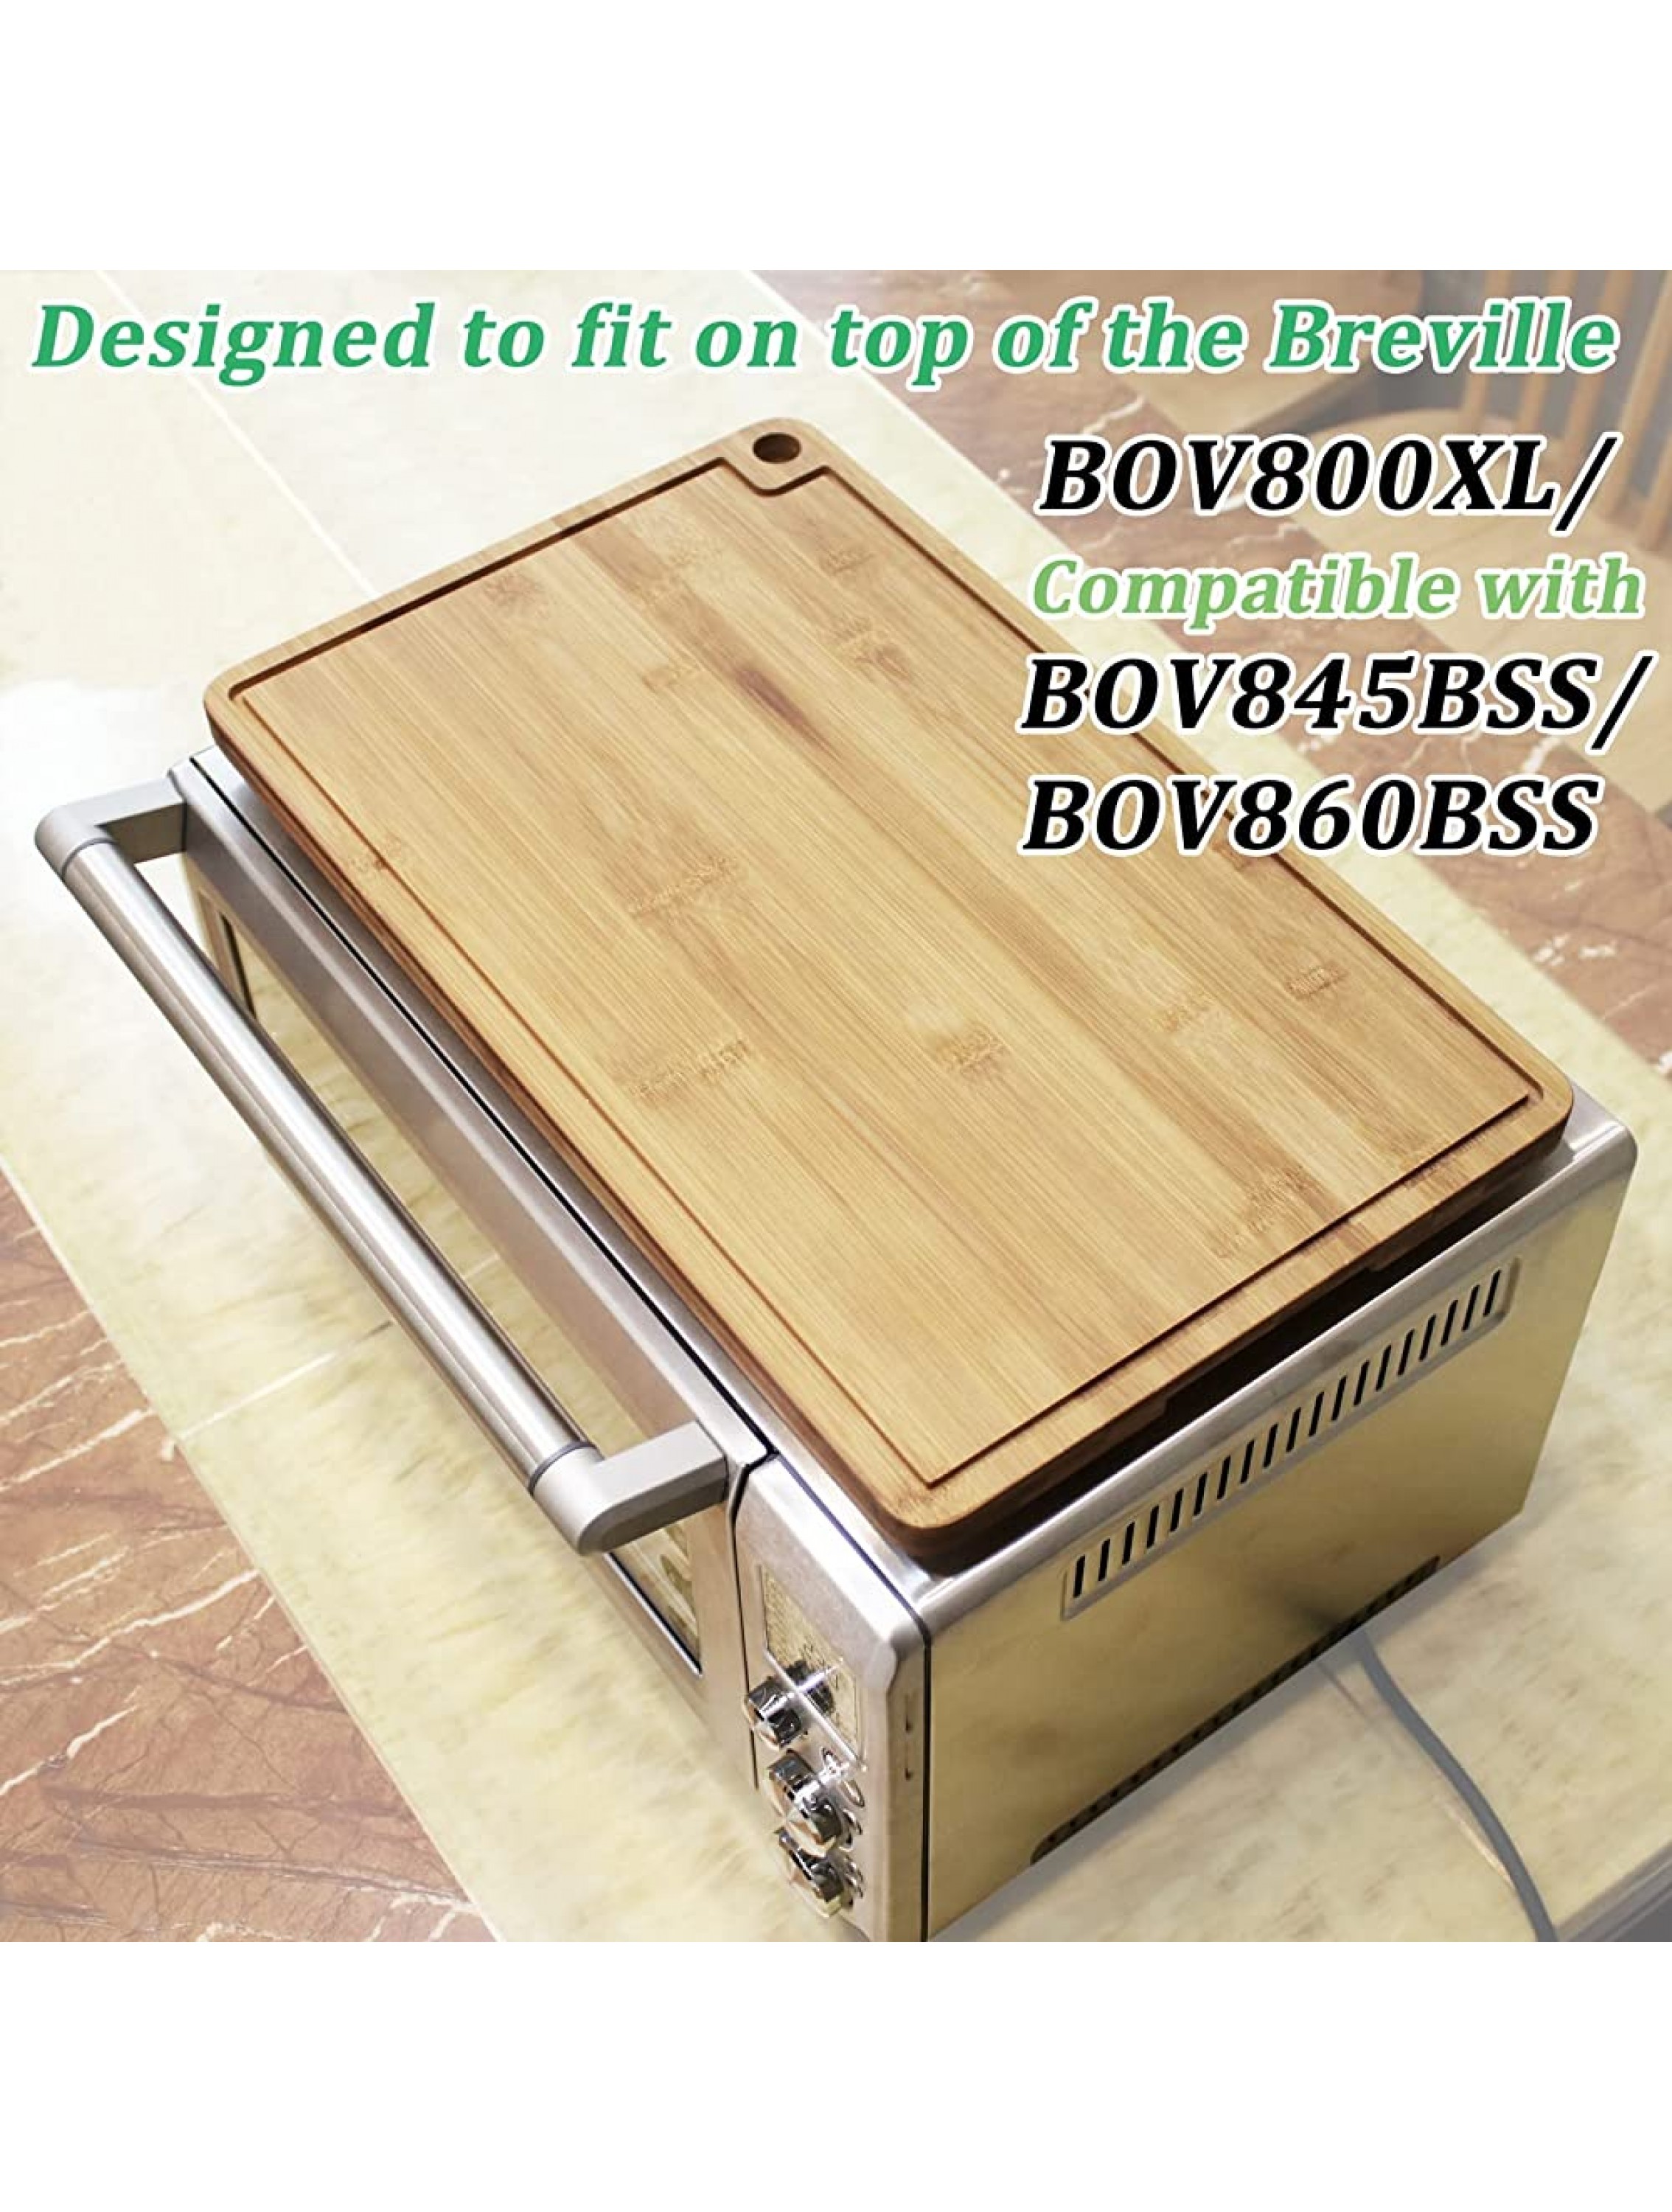 Ansoon Bamboo Wood Cutting Board for Toaster Smart Oven Air Compatible for Breville 860BSS 845BSS BOV800XL With Heat Resistant Silicone Feet Creates Storage Space Protect Cabinets Oven -17.8x10.8 - B8R4GY8P2